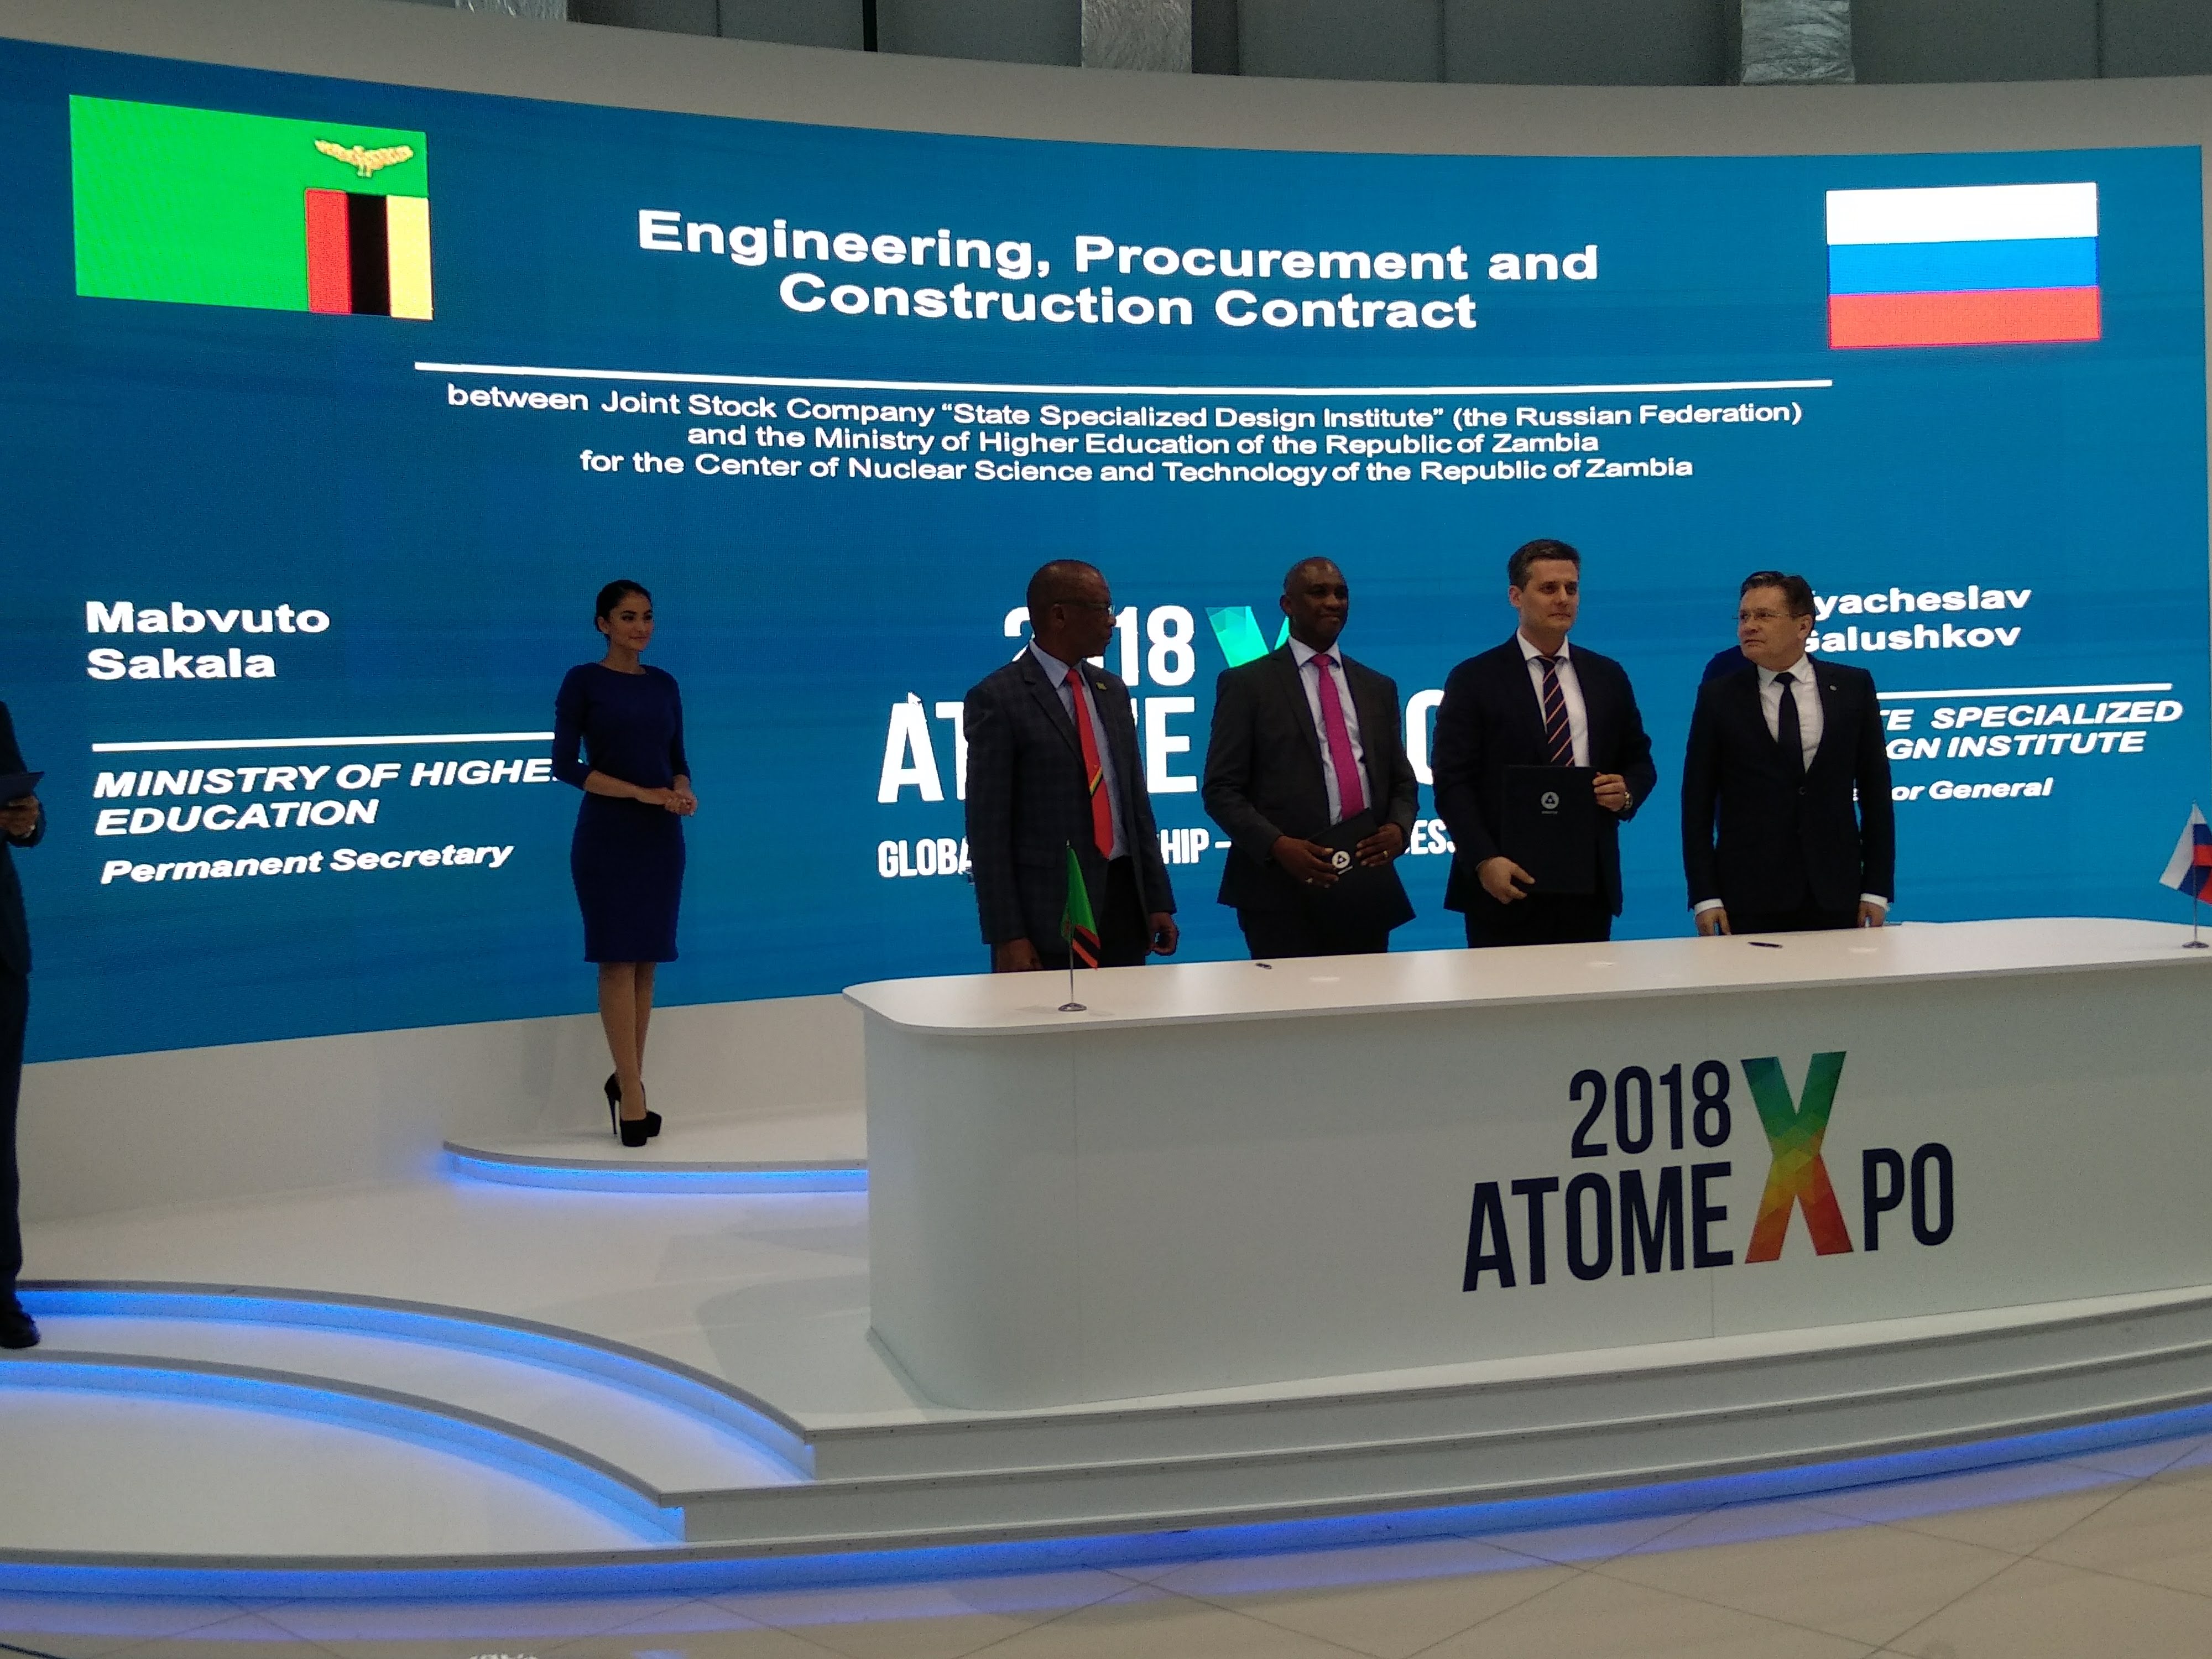 Rosatom and Zambia signed a general contract for the construction of a Centre for Nuclear Science and Technology